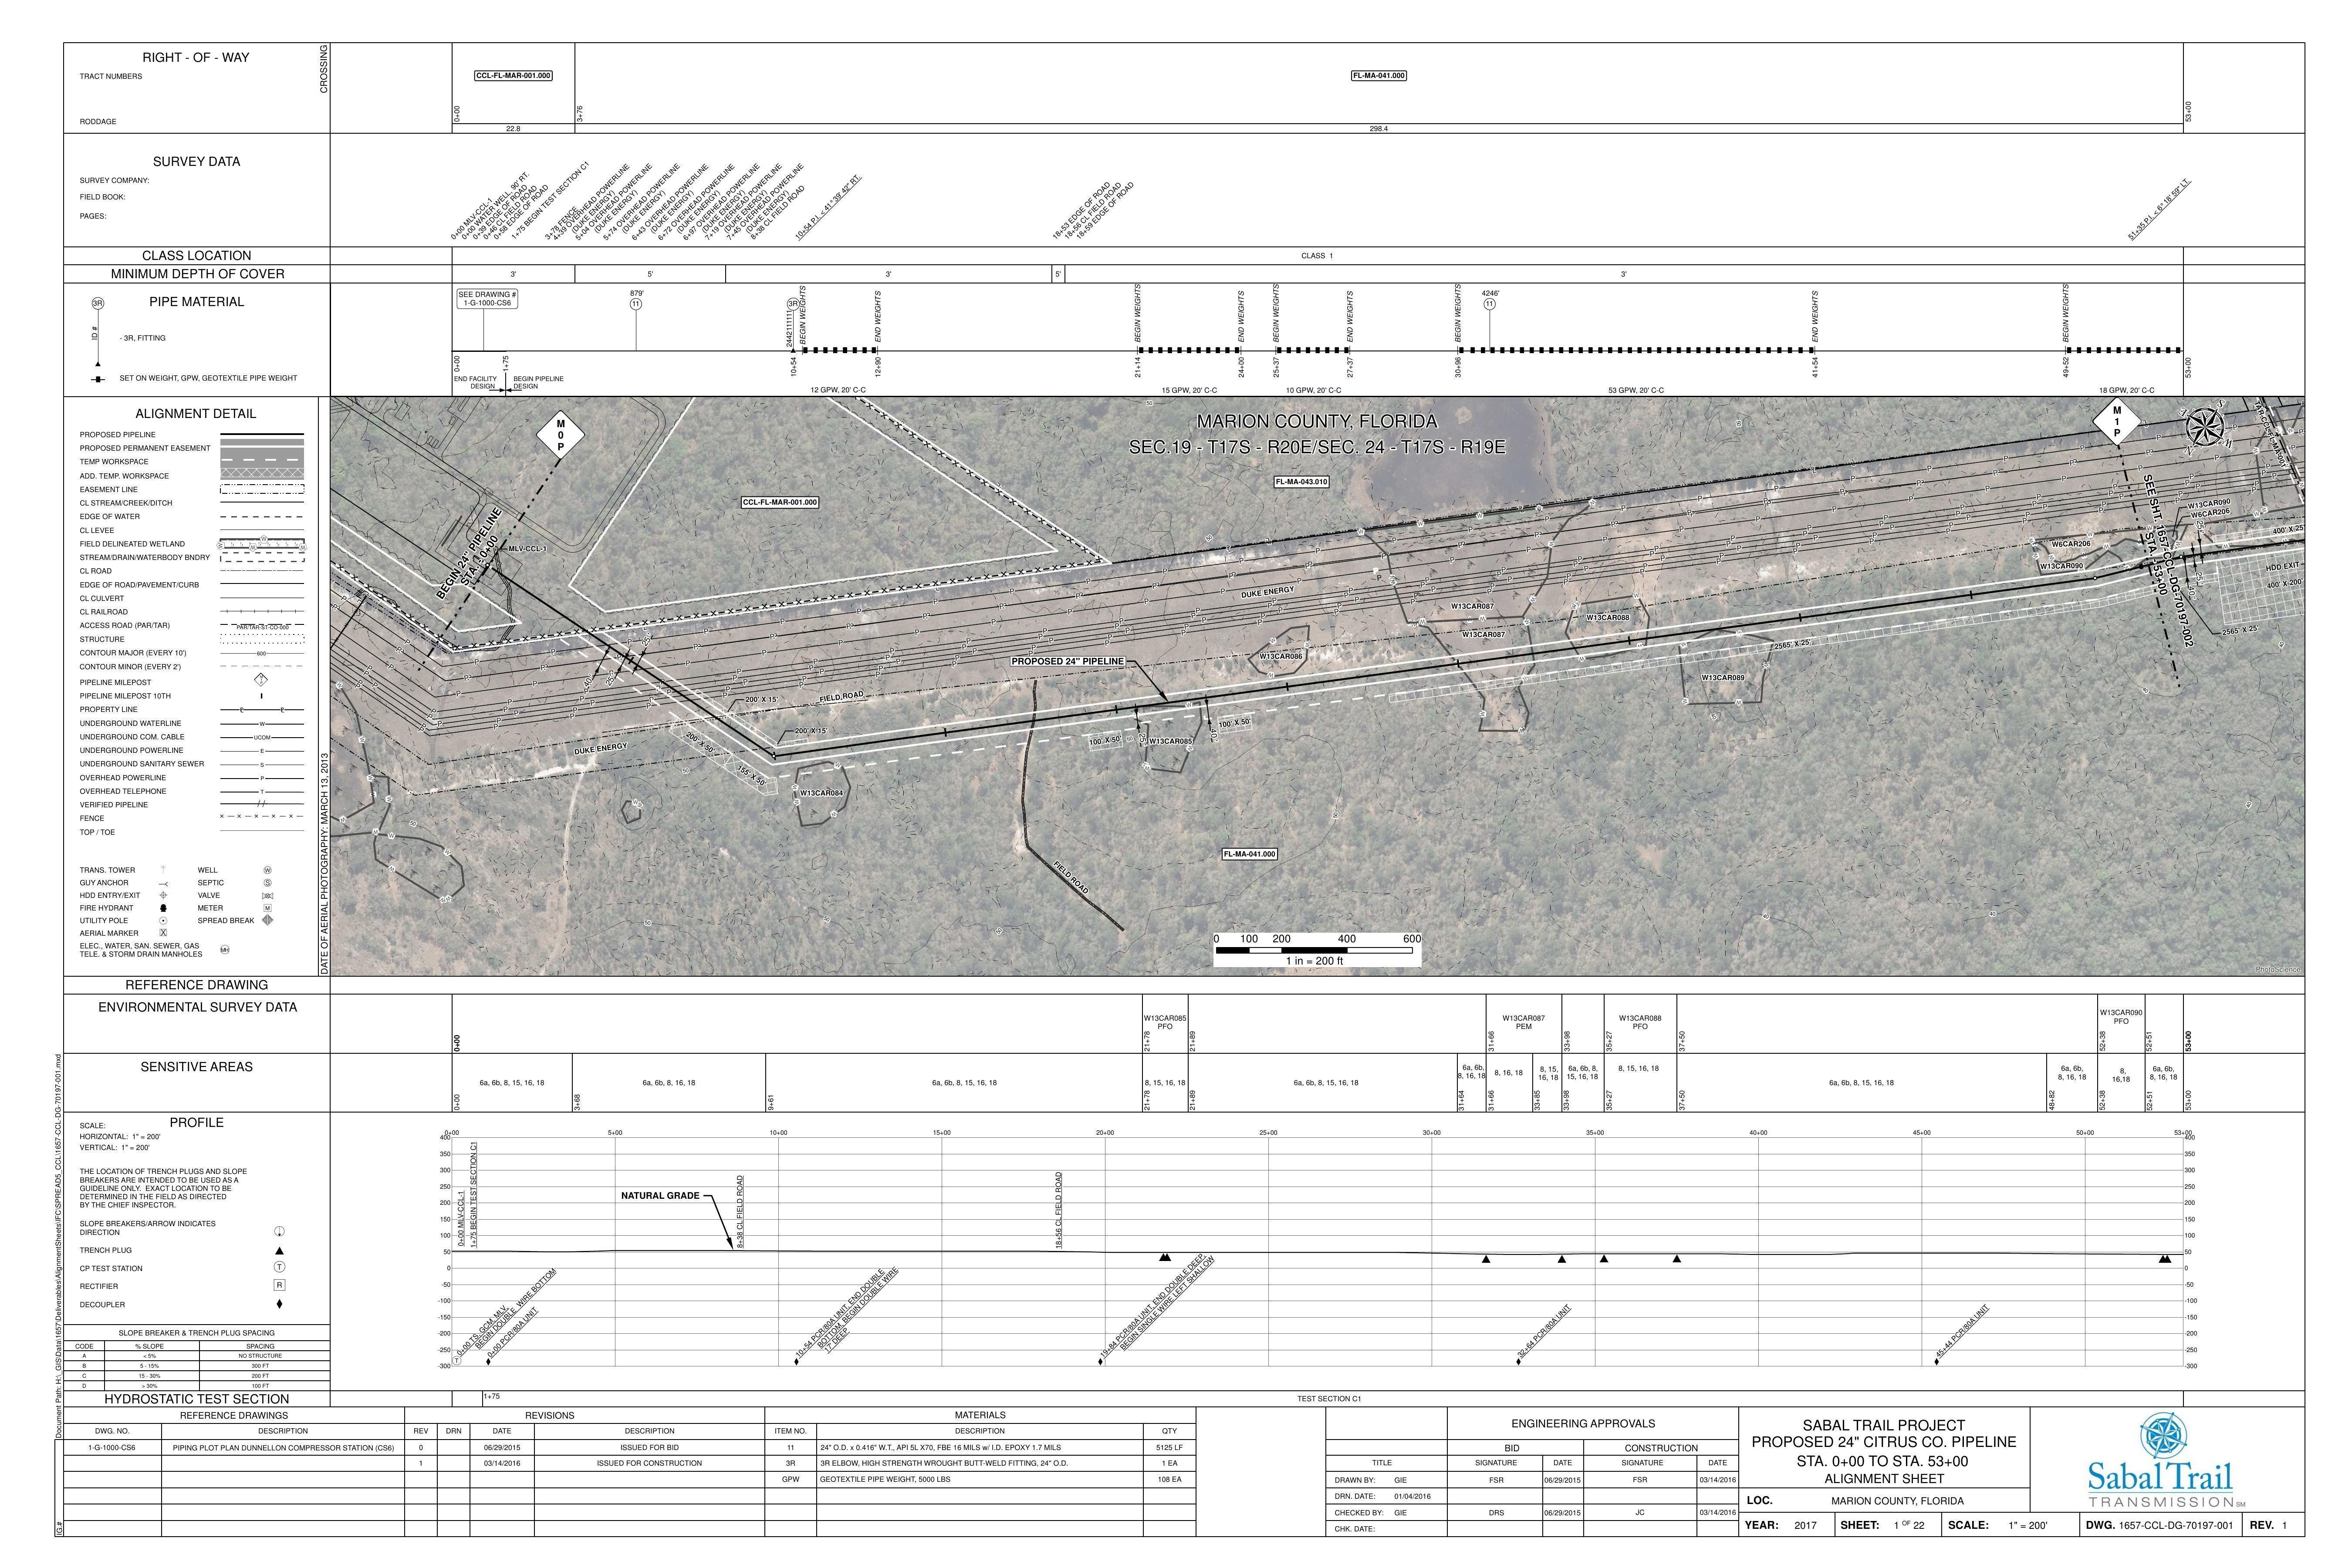 1657-CCL-DG-70197-001, STA. 0+00 TO STA. 53+00, PIPING PLOT PLAN DUNNELLON COMPRESSOR STATION (CS6), BEGIN PIPELINE, Halpata Tastanaki Preserve, Withlacoochee Riverine & Lake System Outstanding Florida Water, PROPOSED 24-inch CITRUS CO. PIPELINE, MARION COUNTY, FLORIDA, 28.998947, -82.348884